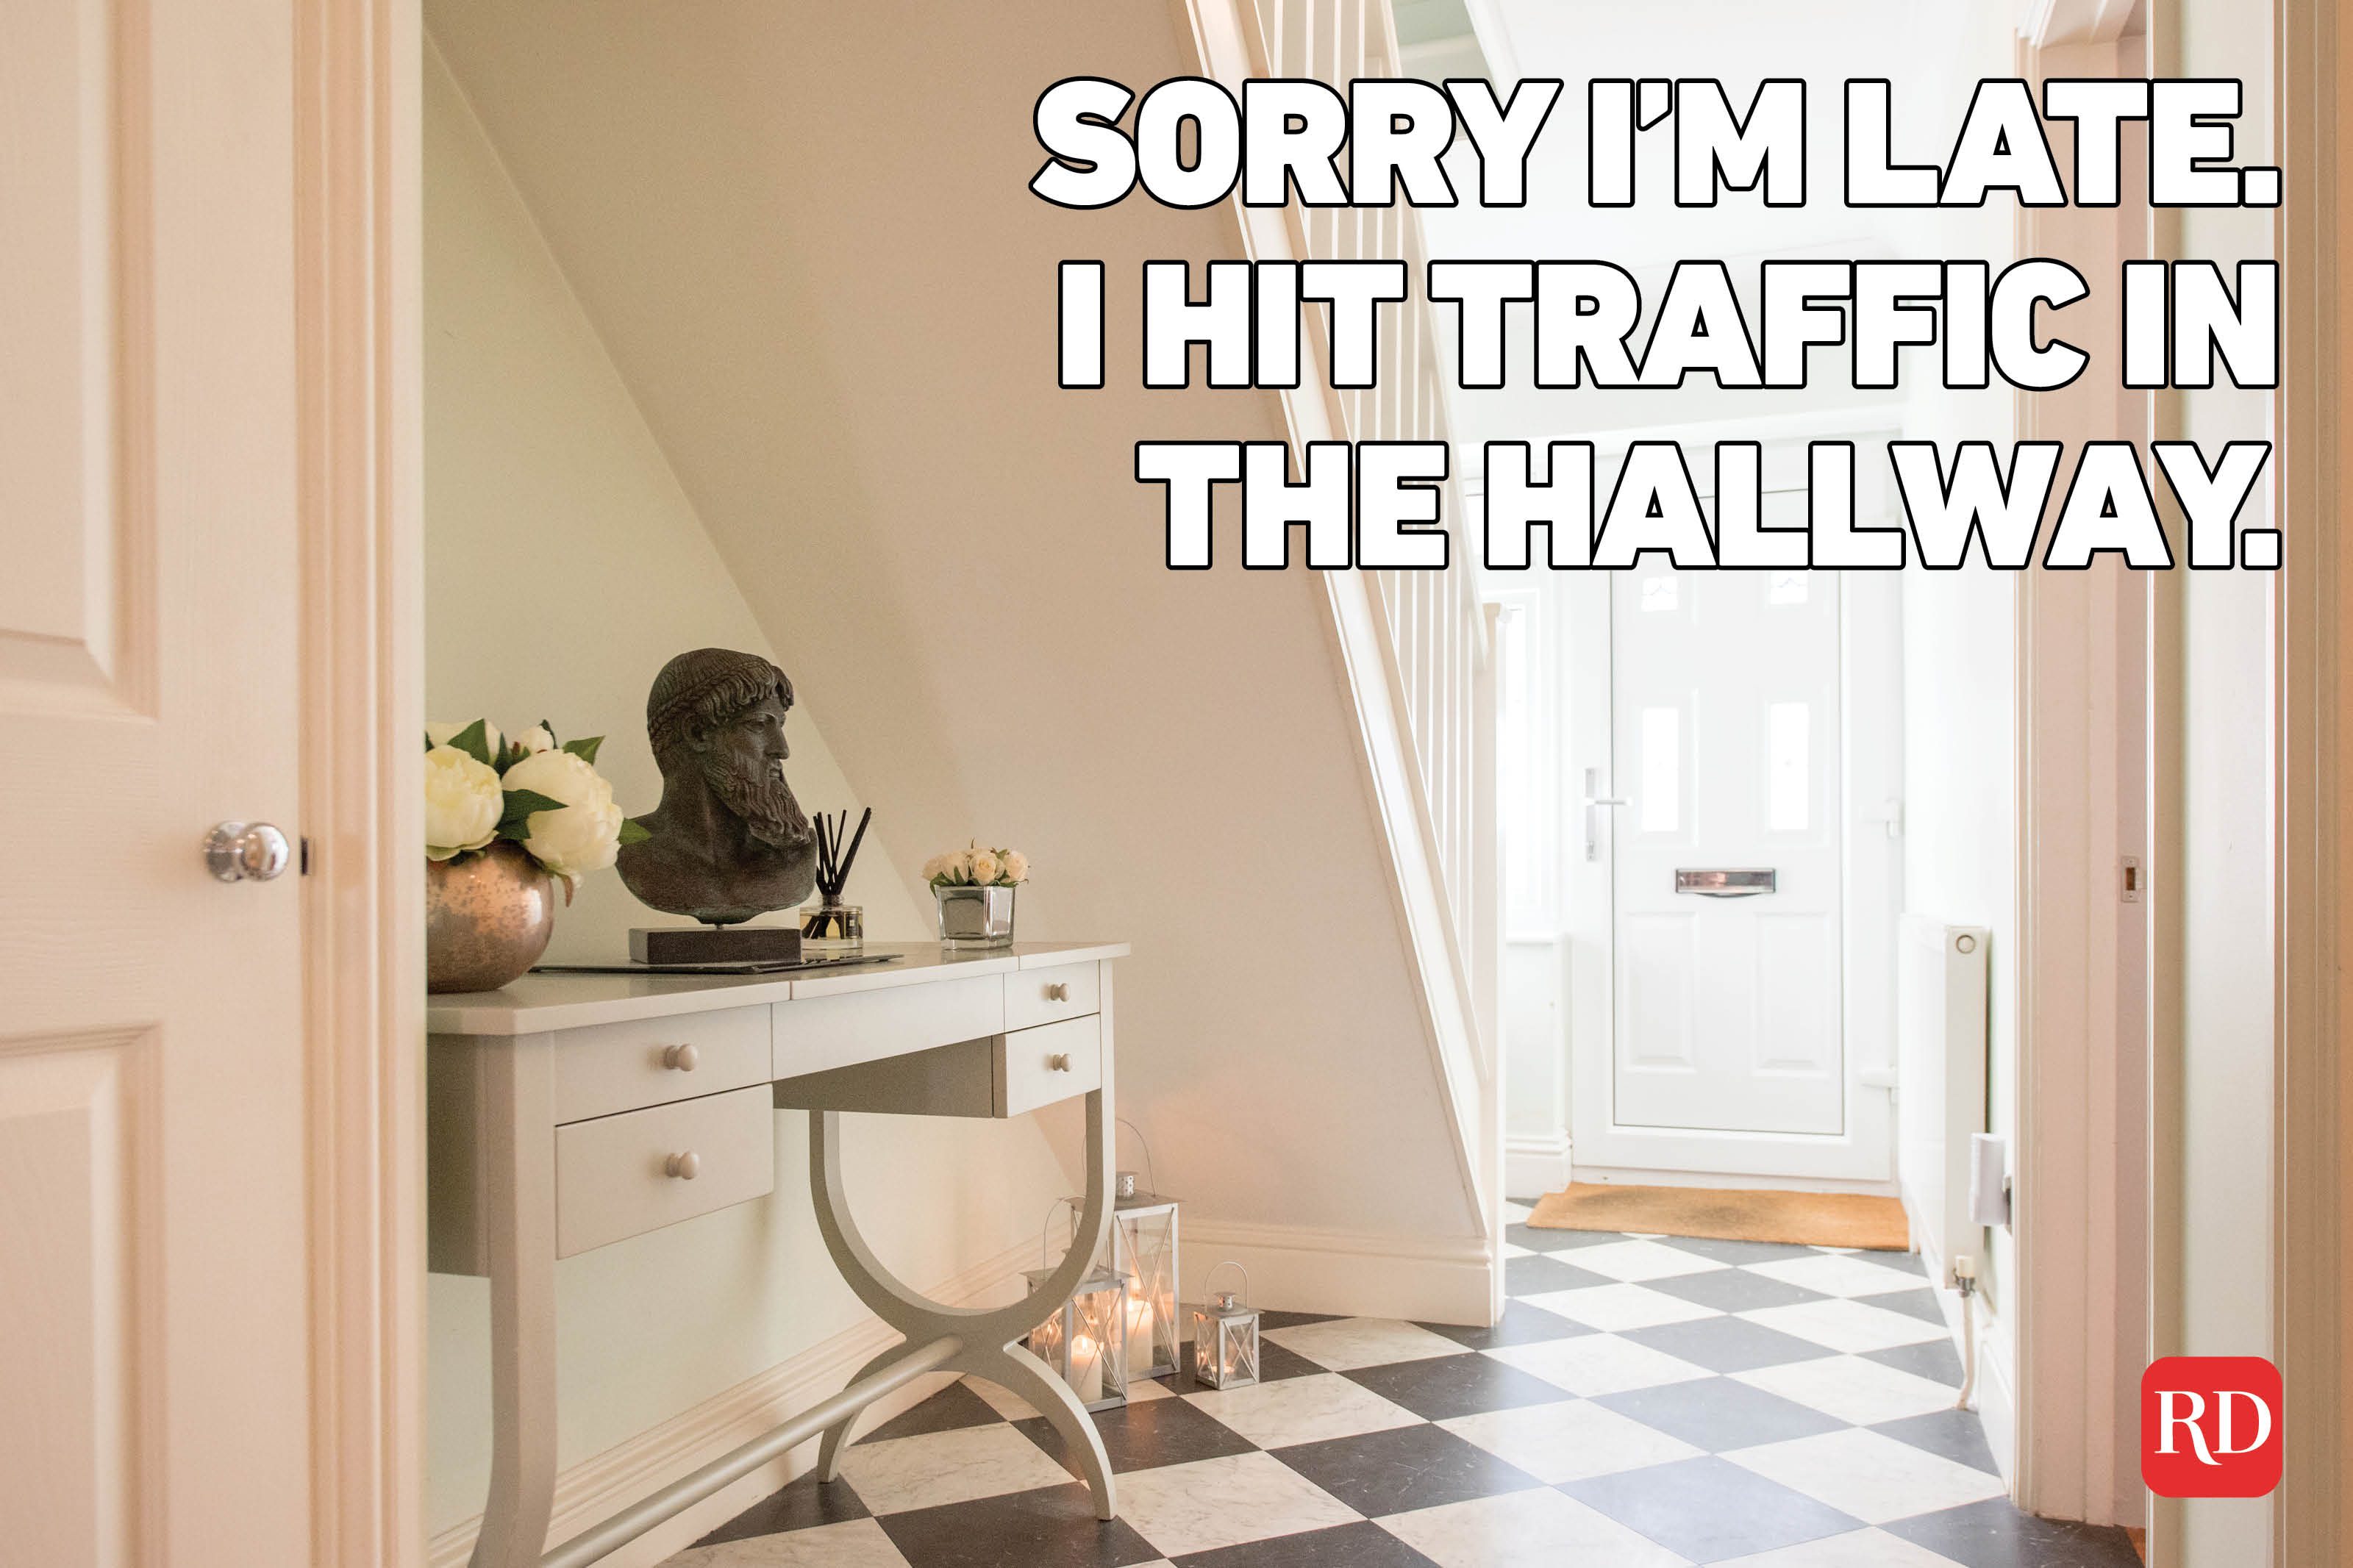 Meme text over image of a house entryway